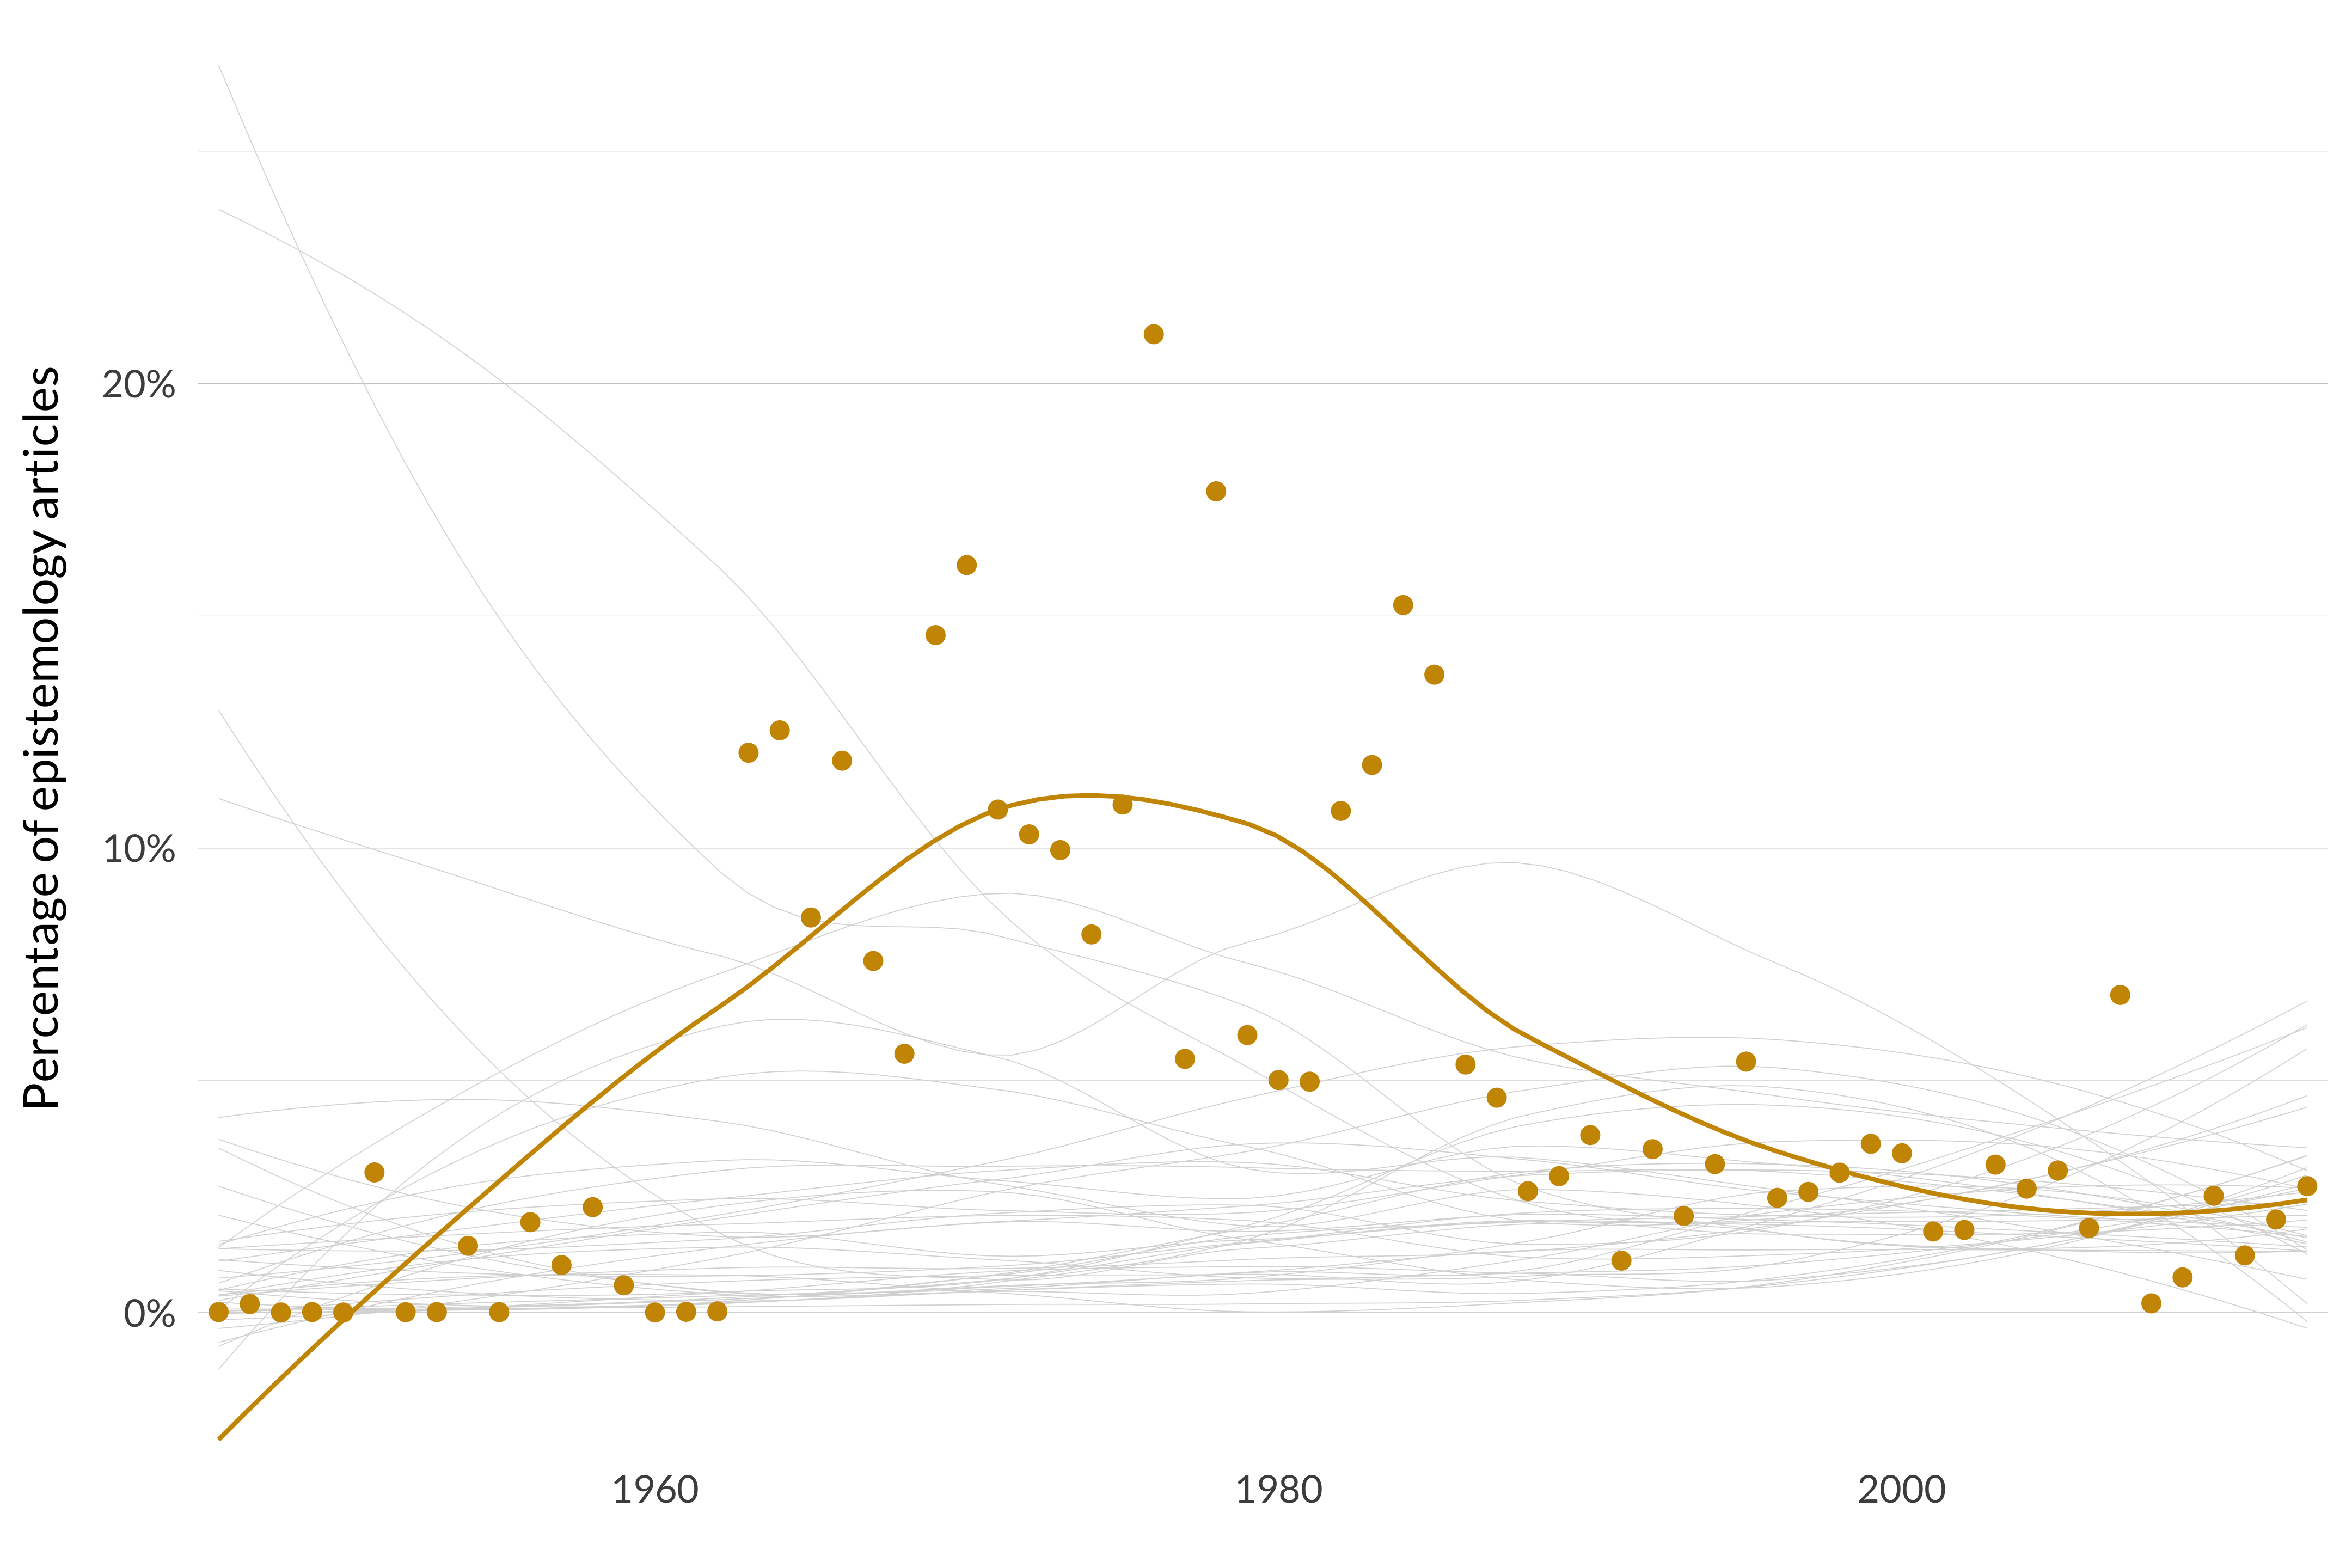 A scatterplot showing the percentage of epistemology articles that are in the epistemology subtopic Gettier each year from 1945-2013. The average value is 5.0%, and the median value is 3.0%. It reaches a peak value of 21.1% in 1976, and has a minimum value of 0.0% in 1950.